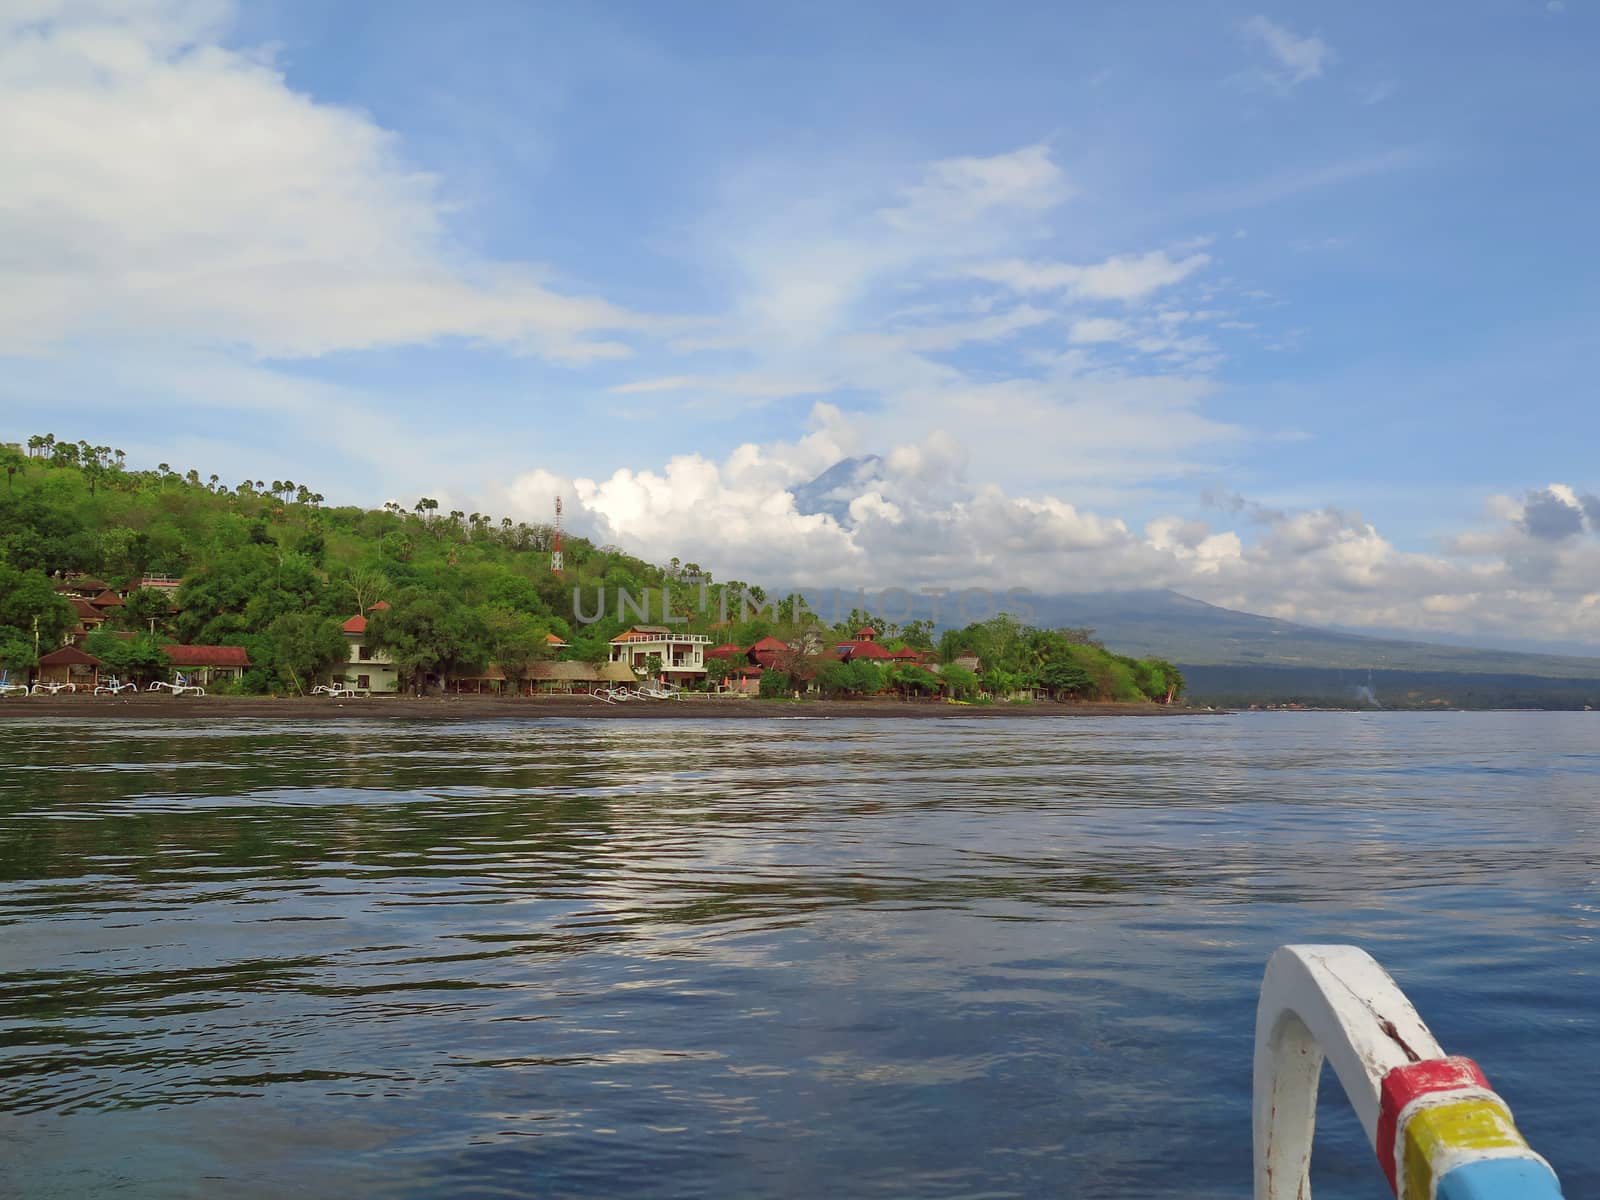 View from boat, lagoon and green coast village. Bali, Indonesia.